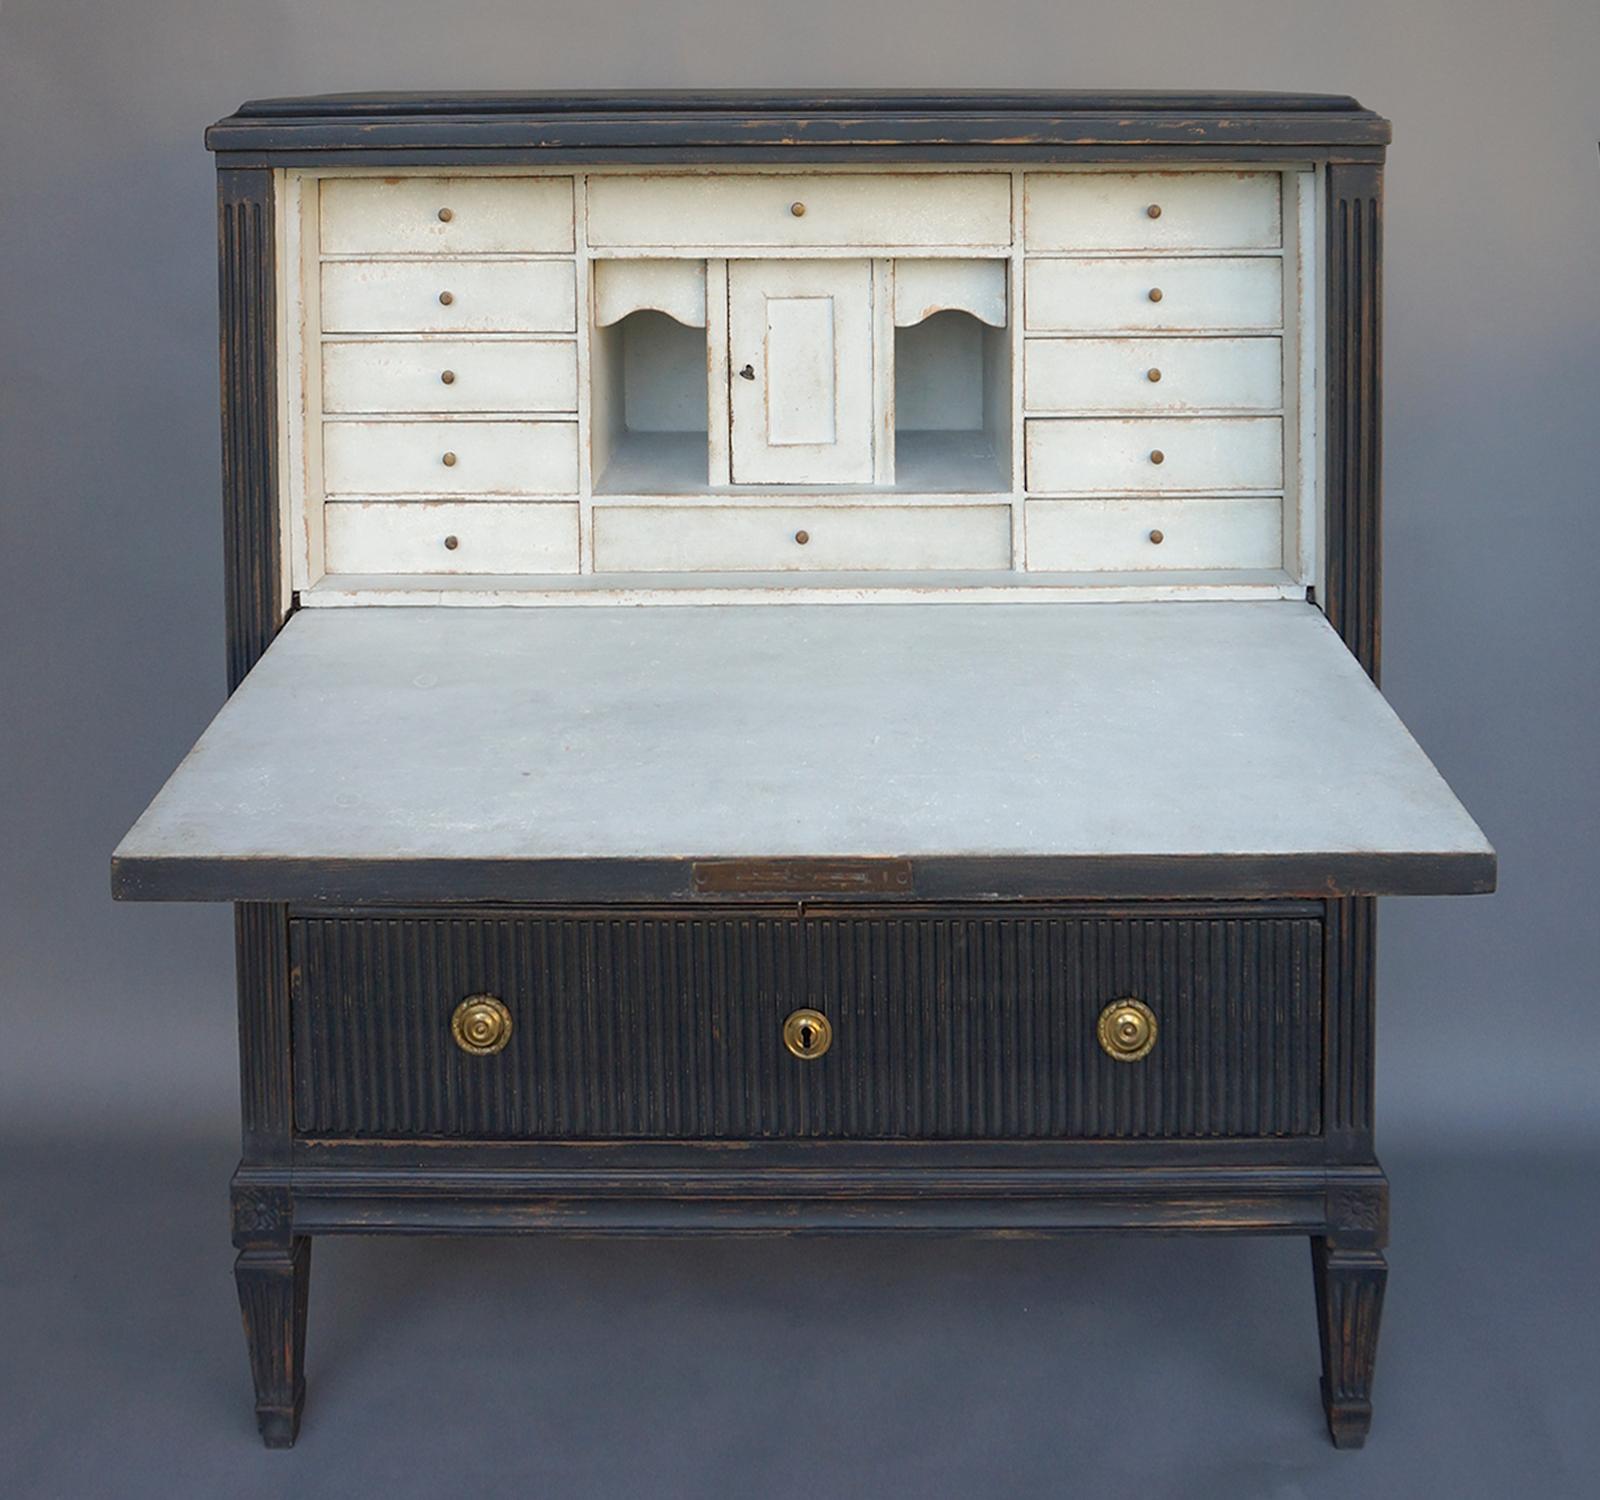 Swedish writing desk with a sophisticated design that reflects its Stockholm origin. The entire front is vertically reeded, with two full-width drawers under the fall-front. The interior is fitted with a central compartment and multiple drawers for